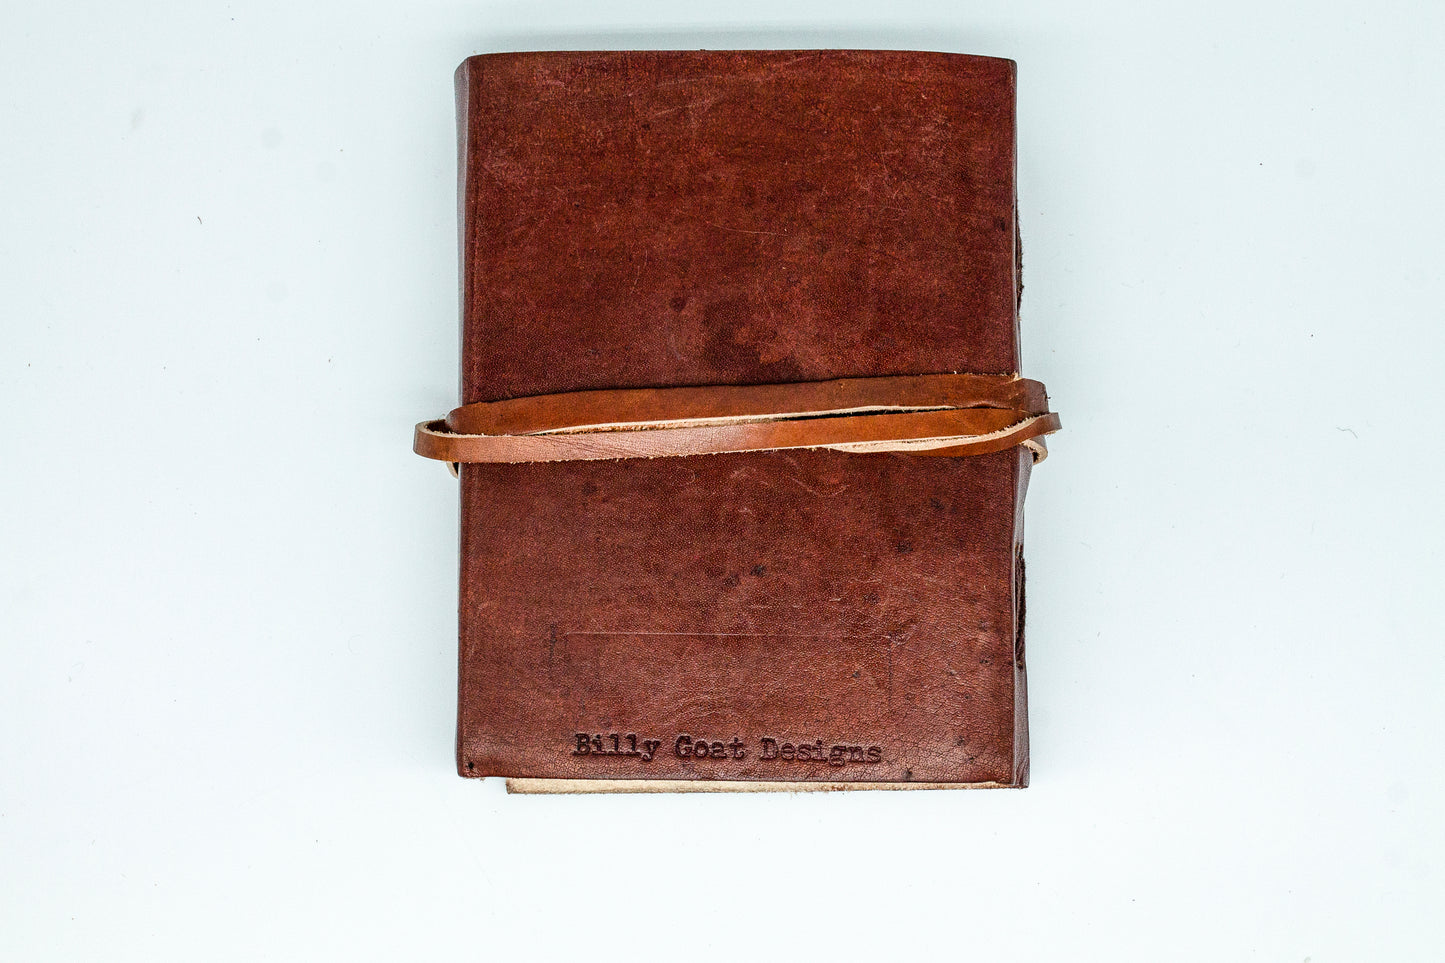 Goat Leather Handmade Journal A6